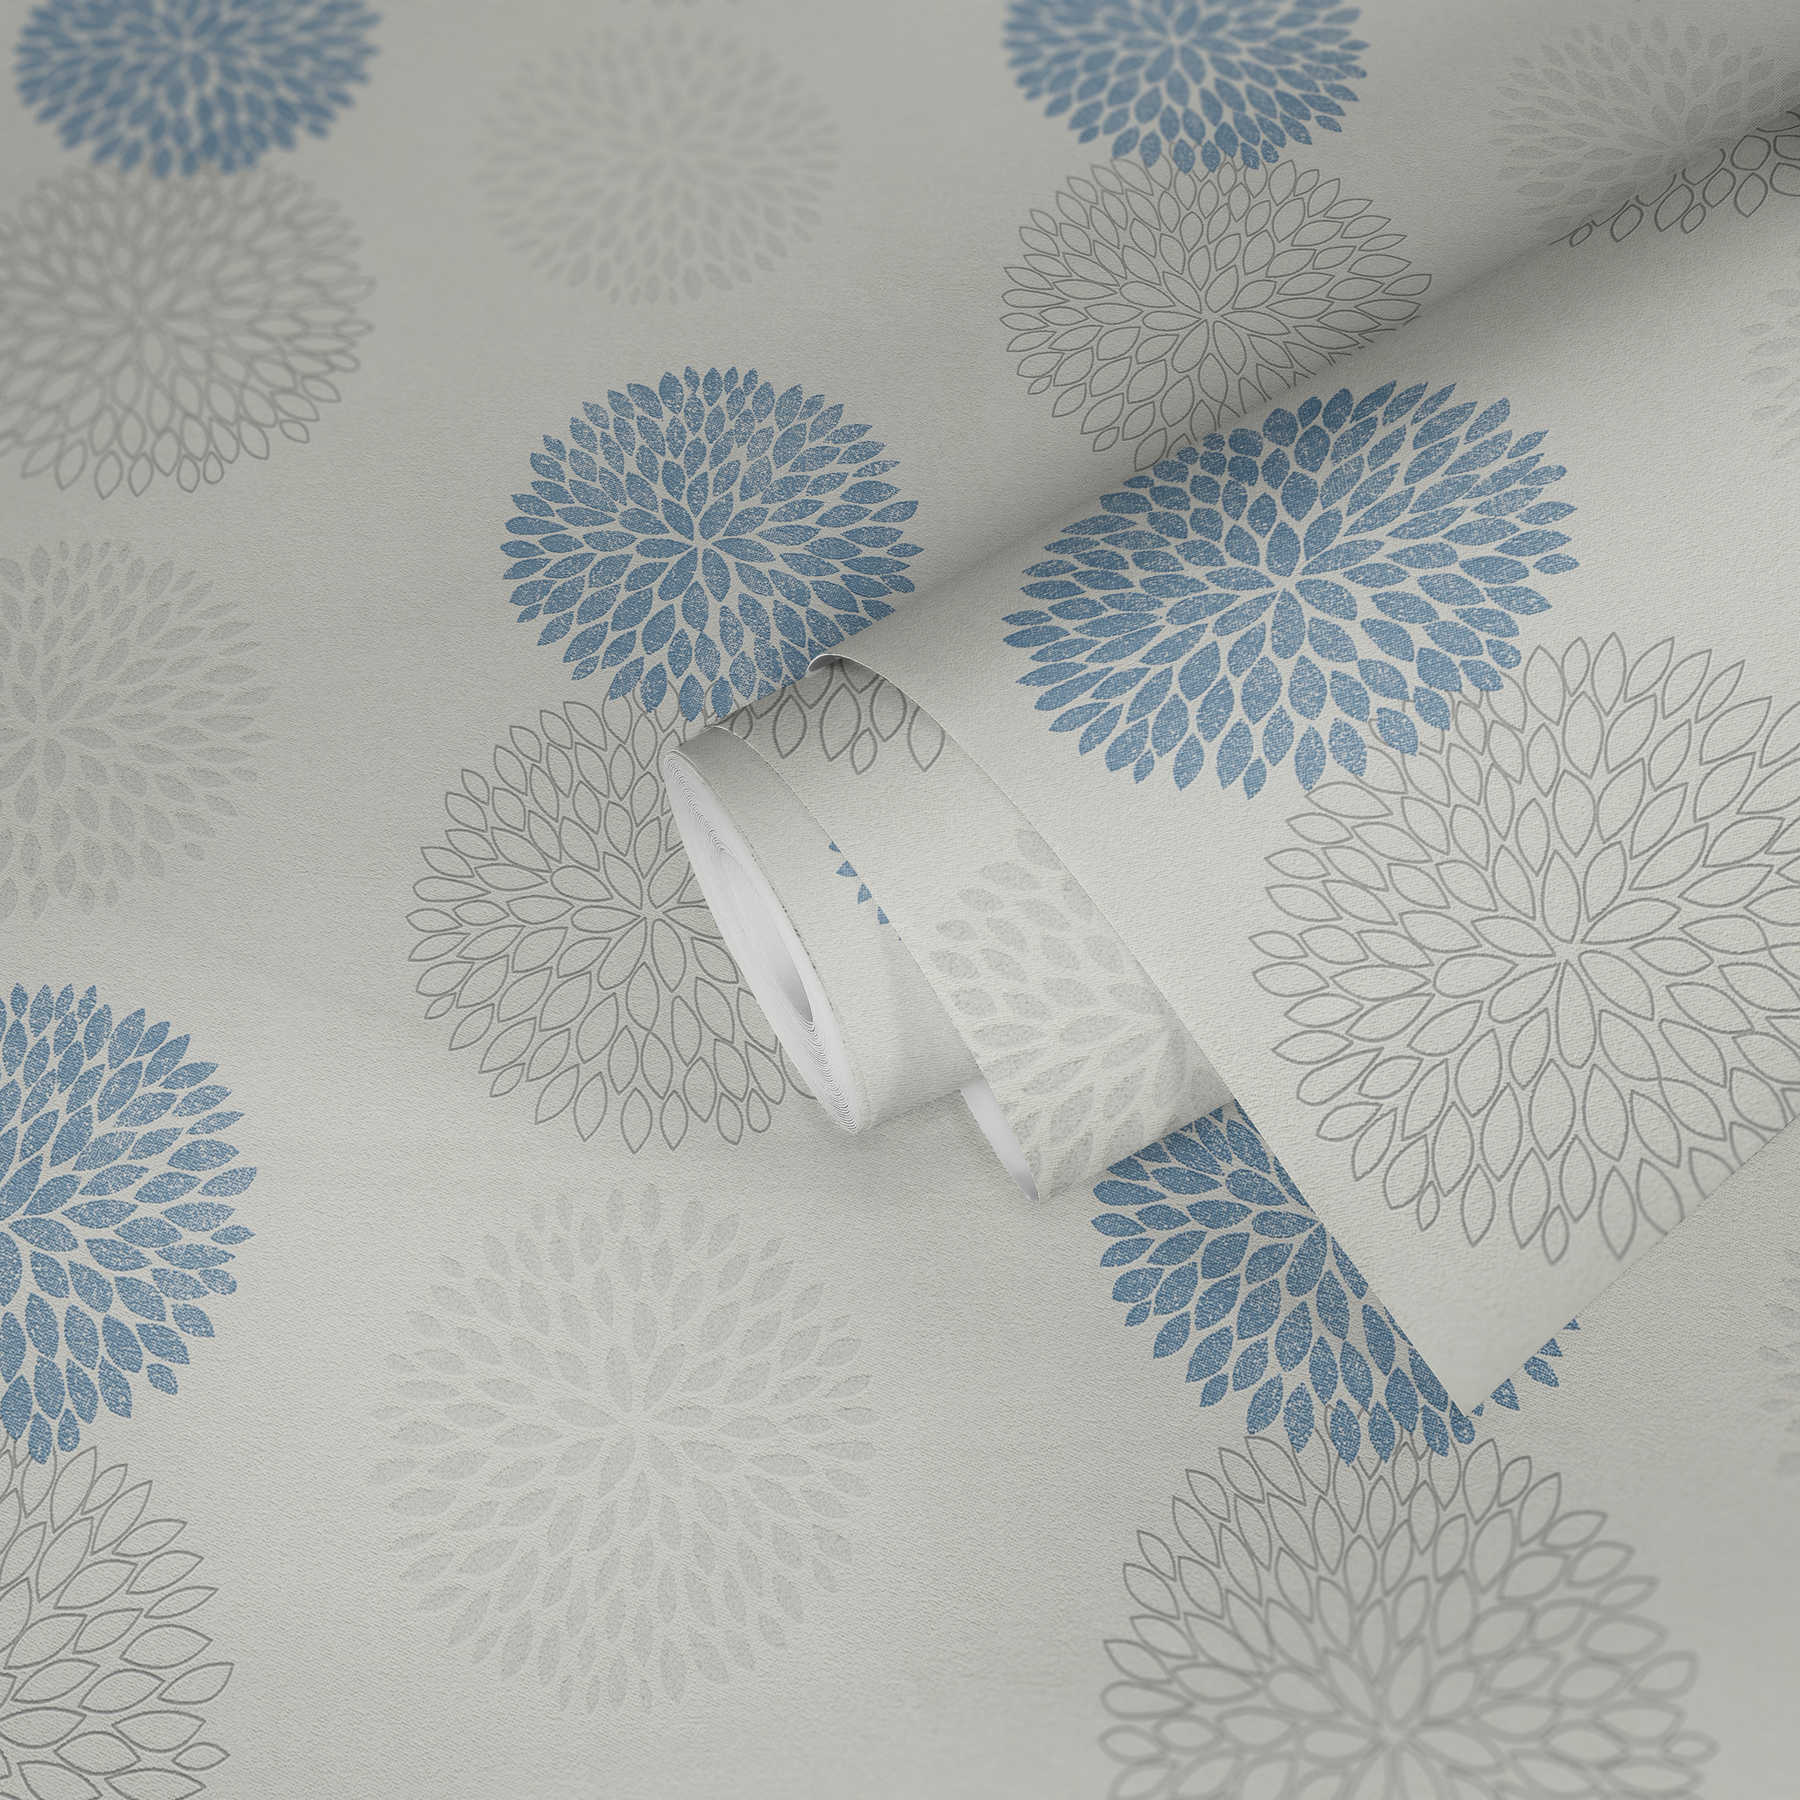             Wallpaper with graphic floral pattern - blue, grey, white
        